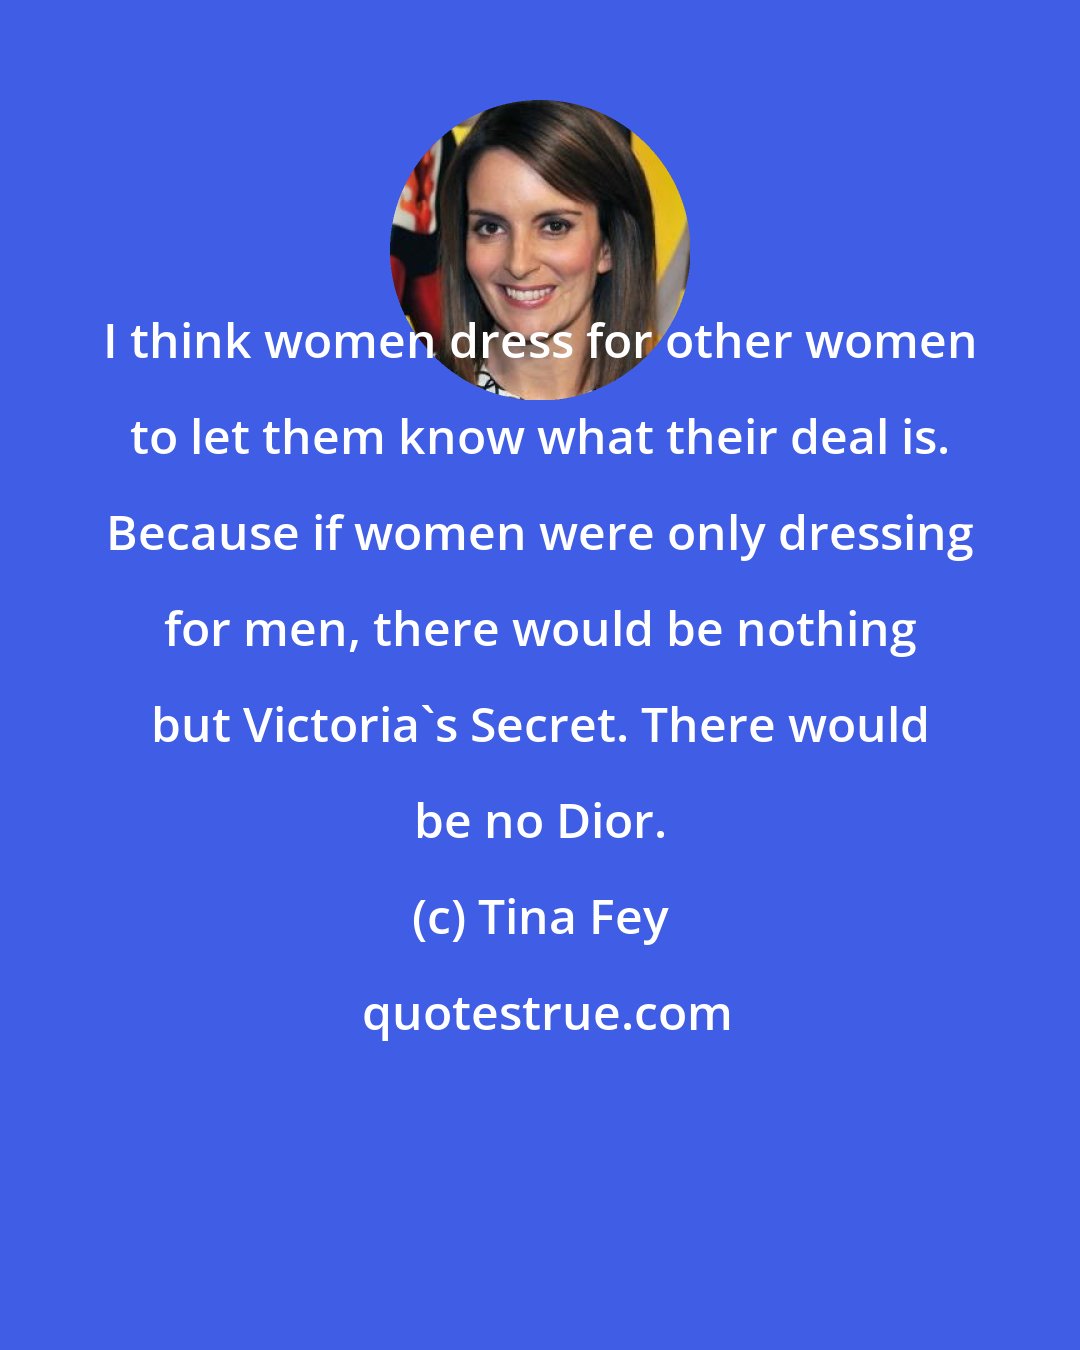 Tina Fey: I think women dress for other women to let them know what their deal is. Because if women were only dressing for men, there would be nothing but Victoria's Secret. There would be no Dior.